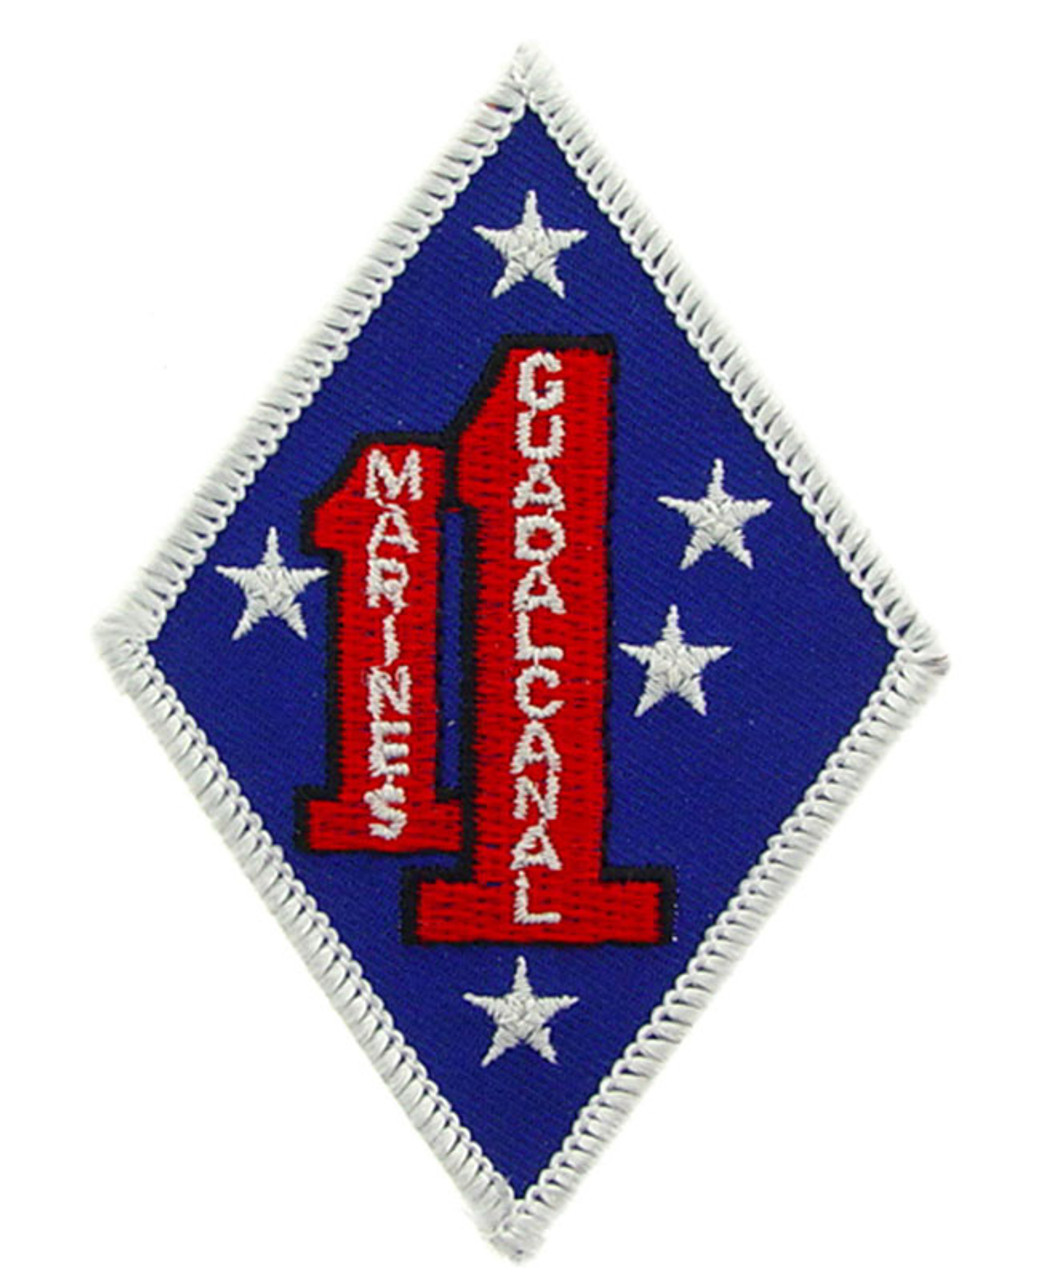 Guadalcanal USMC Patch - The National WWII Museum